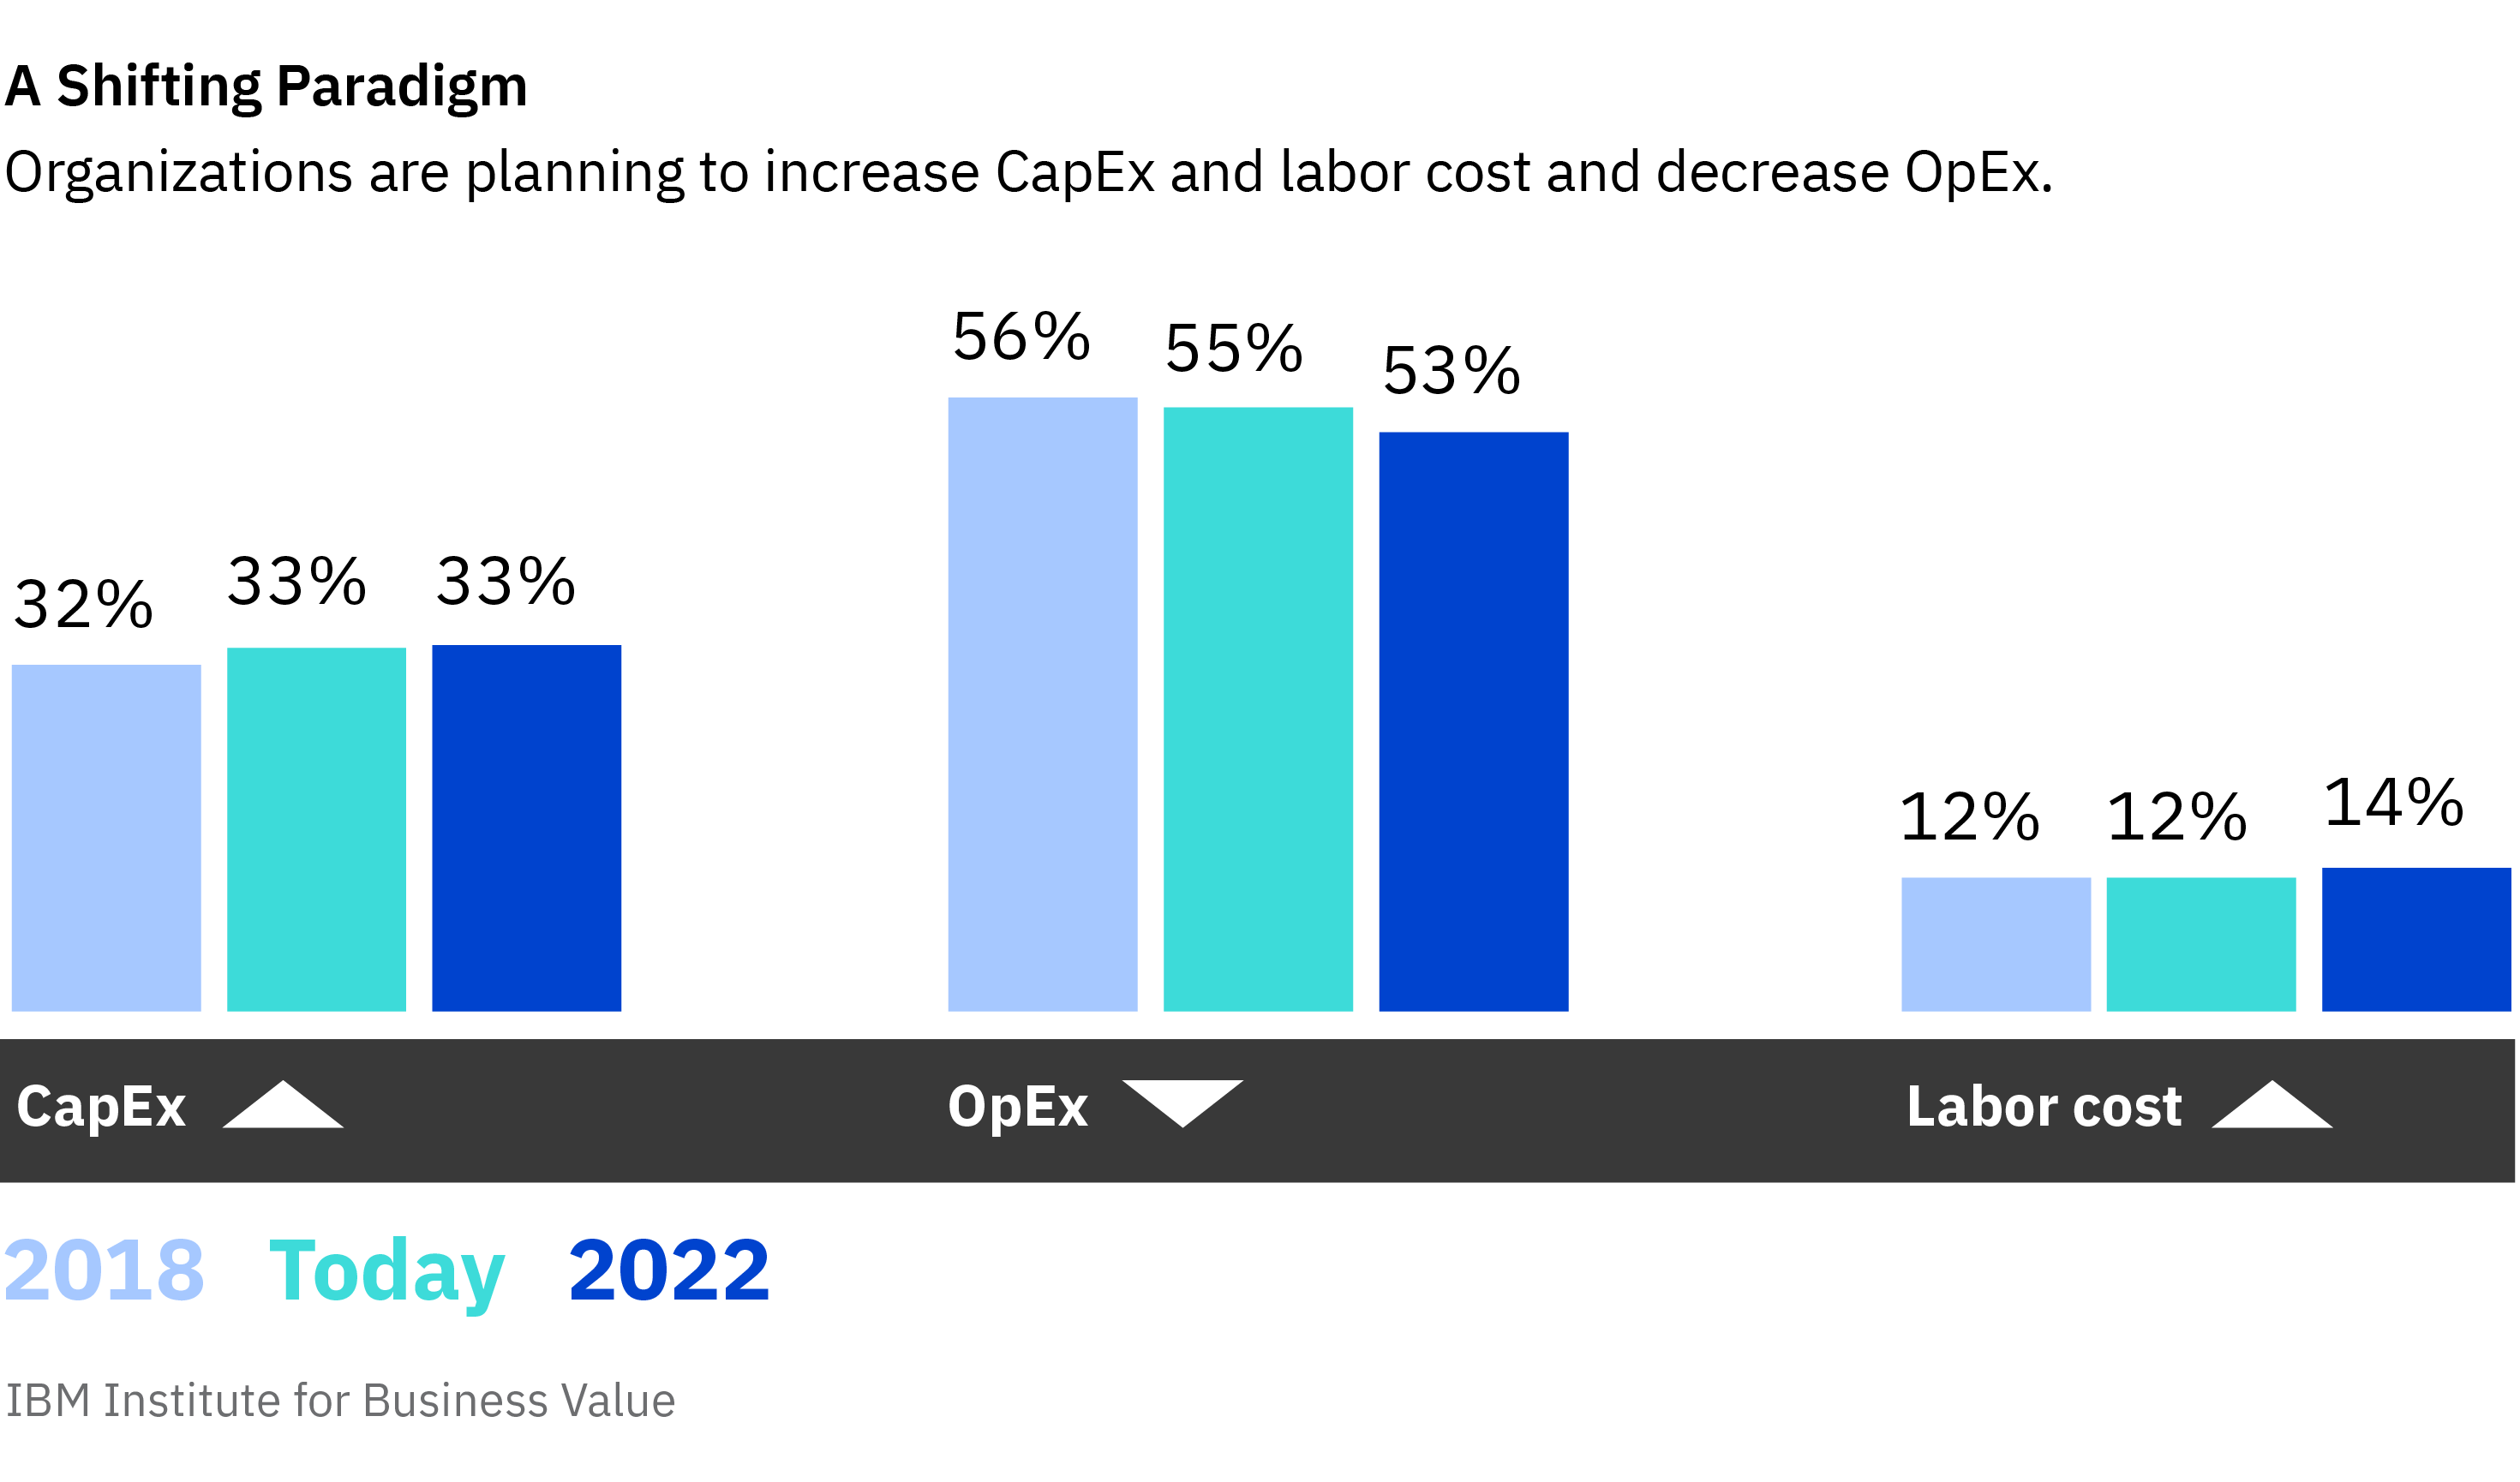 A shifting paradigm. Organizations are planning to increase CapEx and labor cost and decrease OpEx.